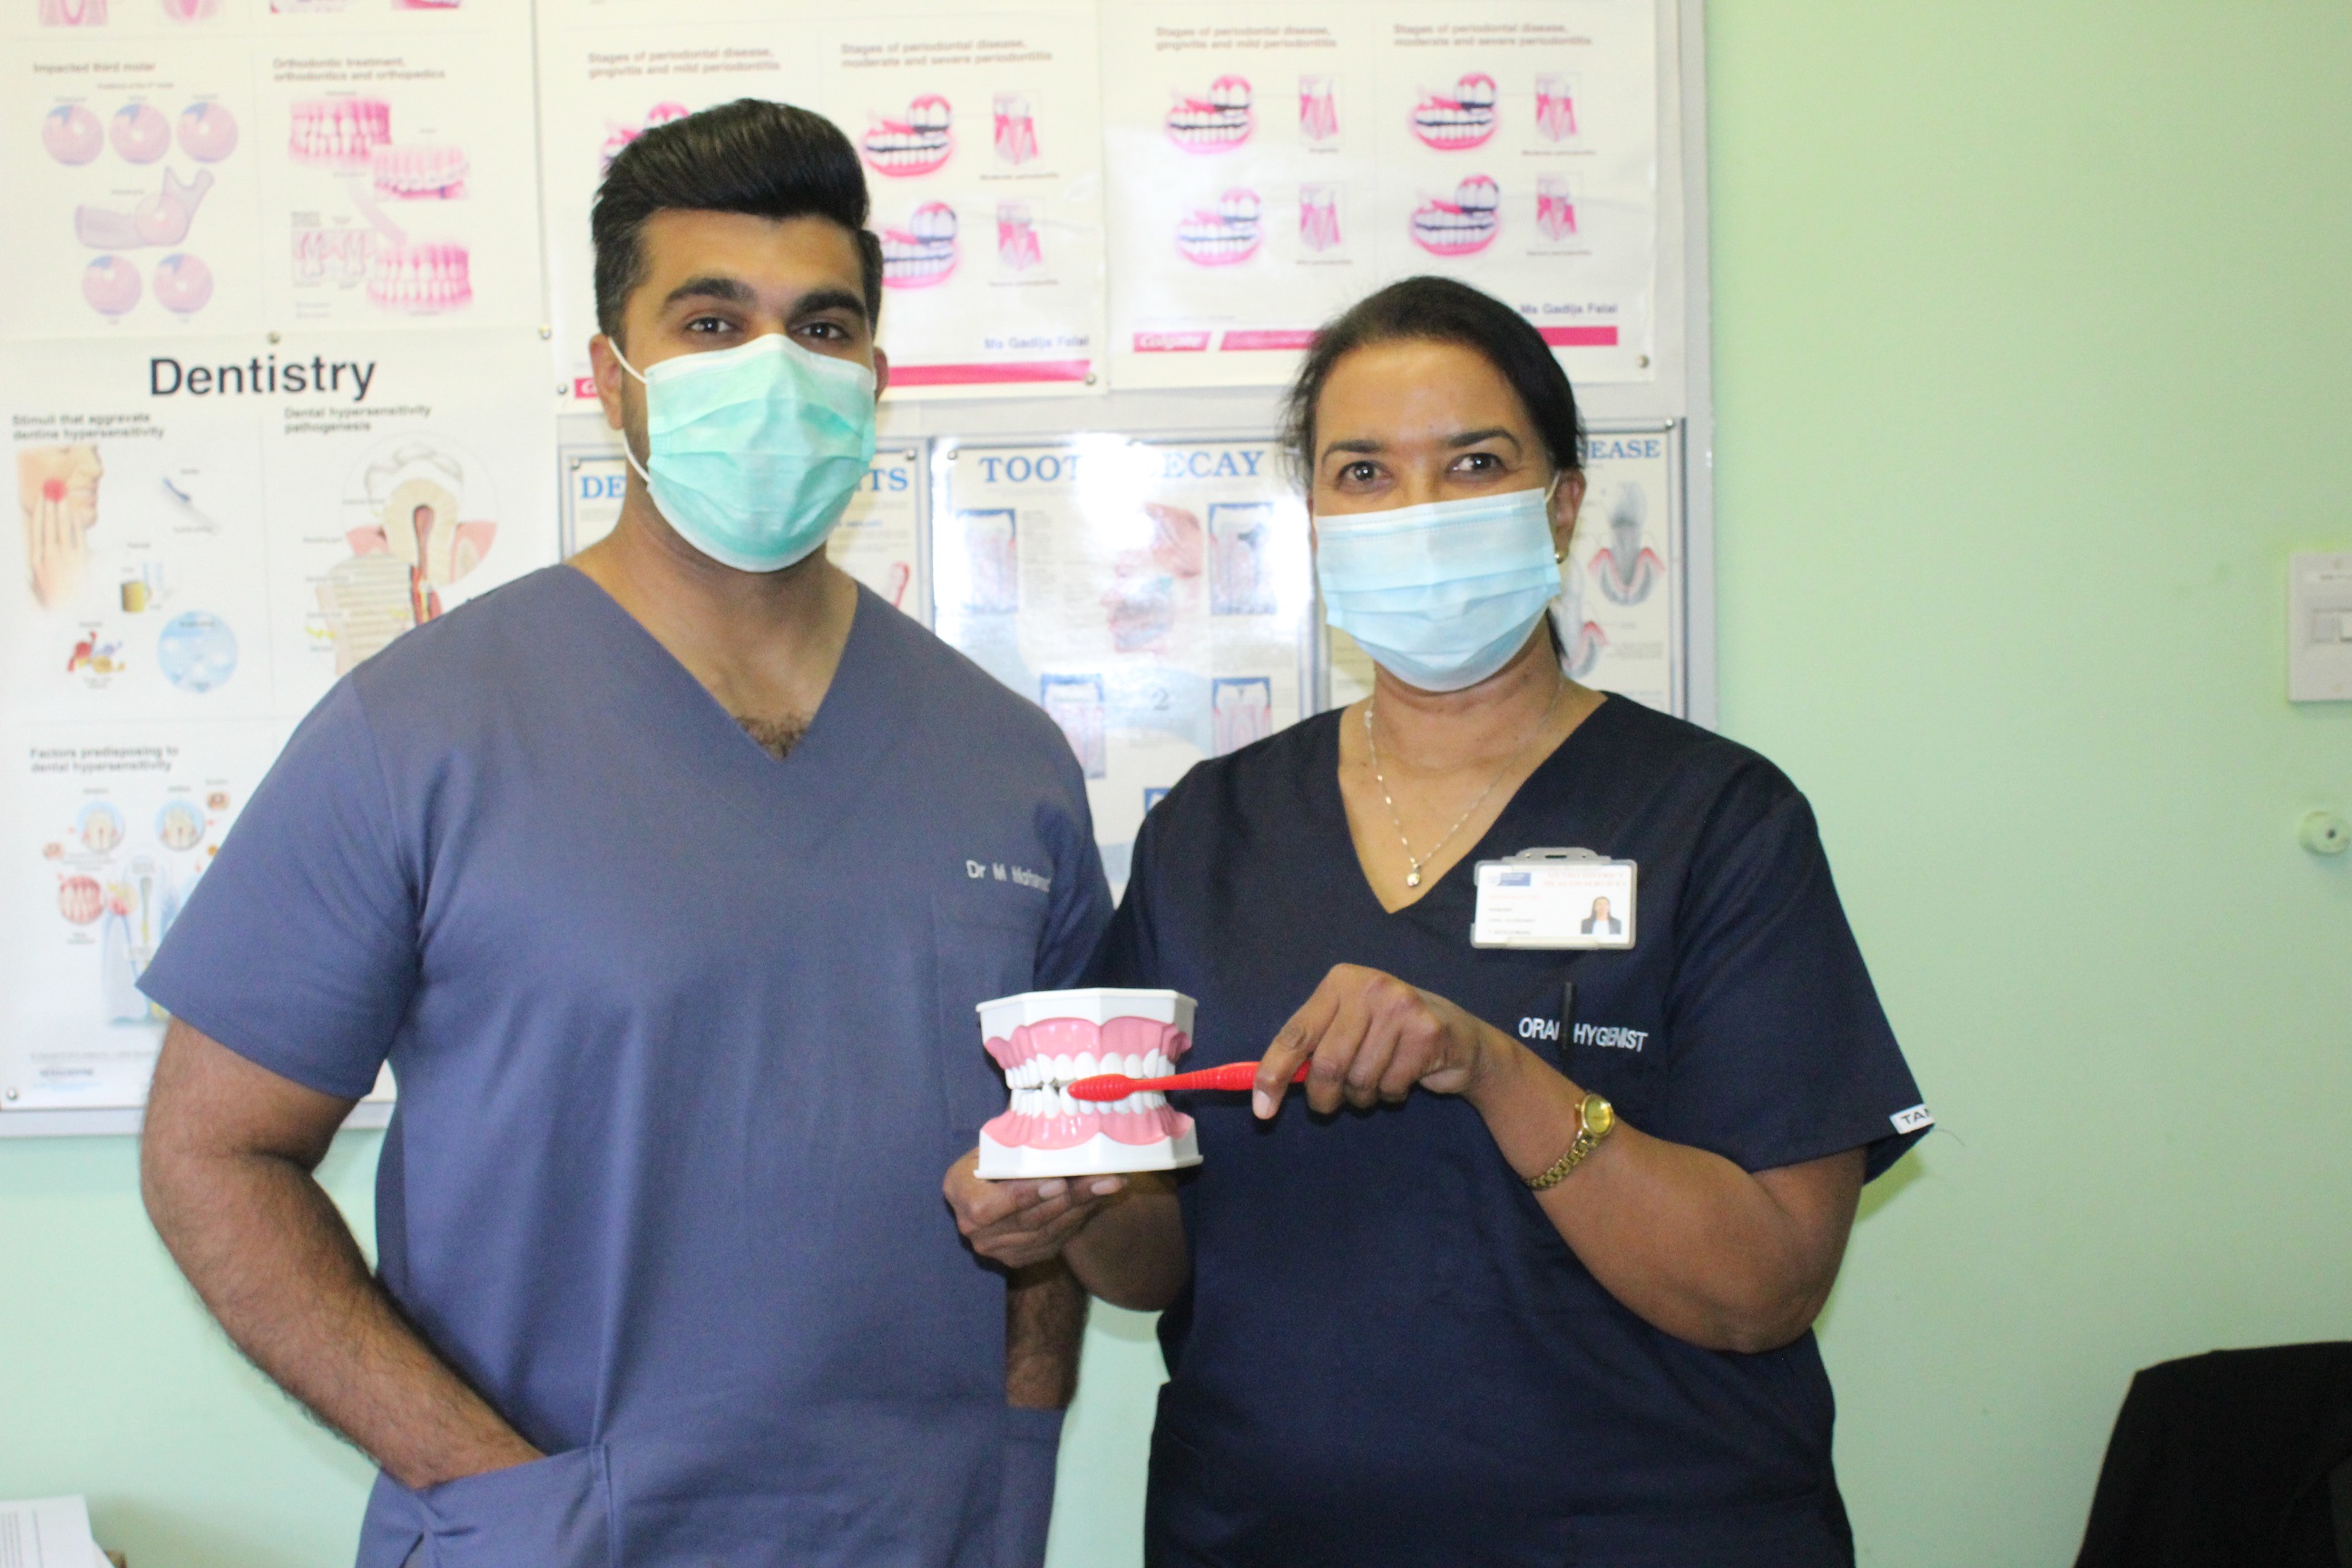 Showing us how to practice good oral health hygiene is Dr Mansoor Mohamed, dentist at Hanover Park CHC with Silvertown Clinic’s Oral Hygienest, Tania Woodman.